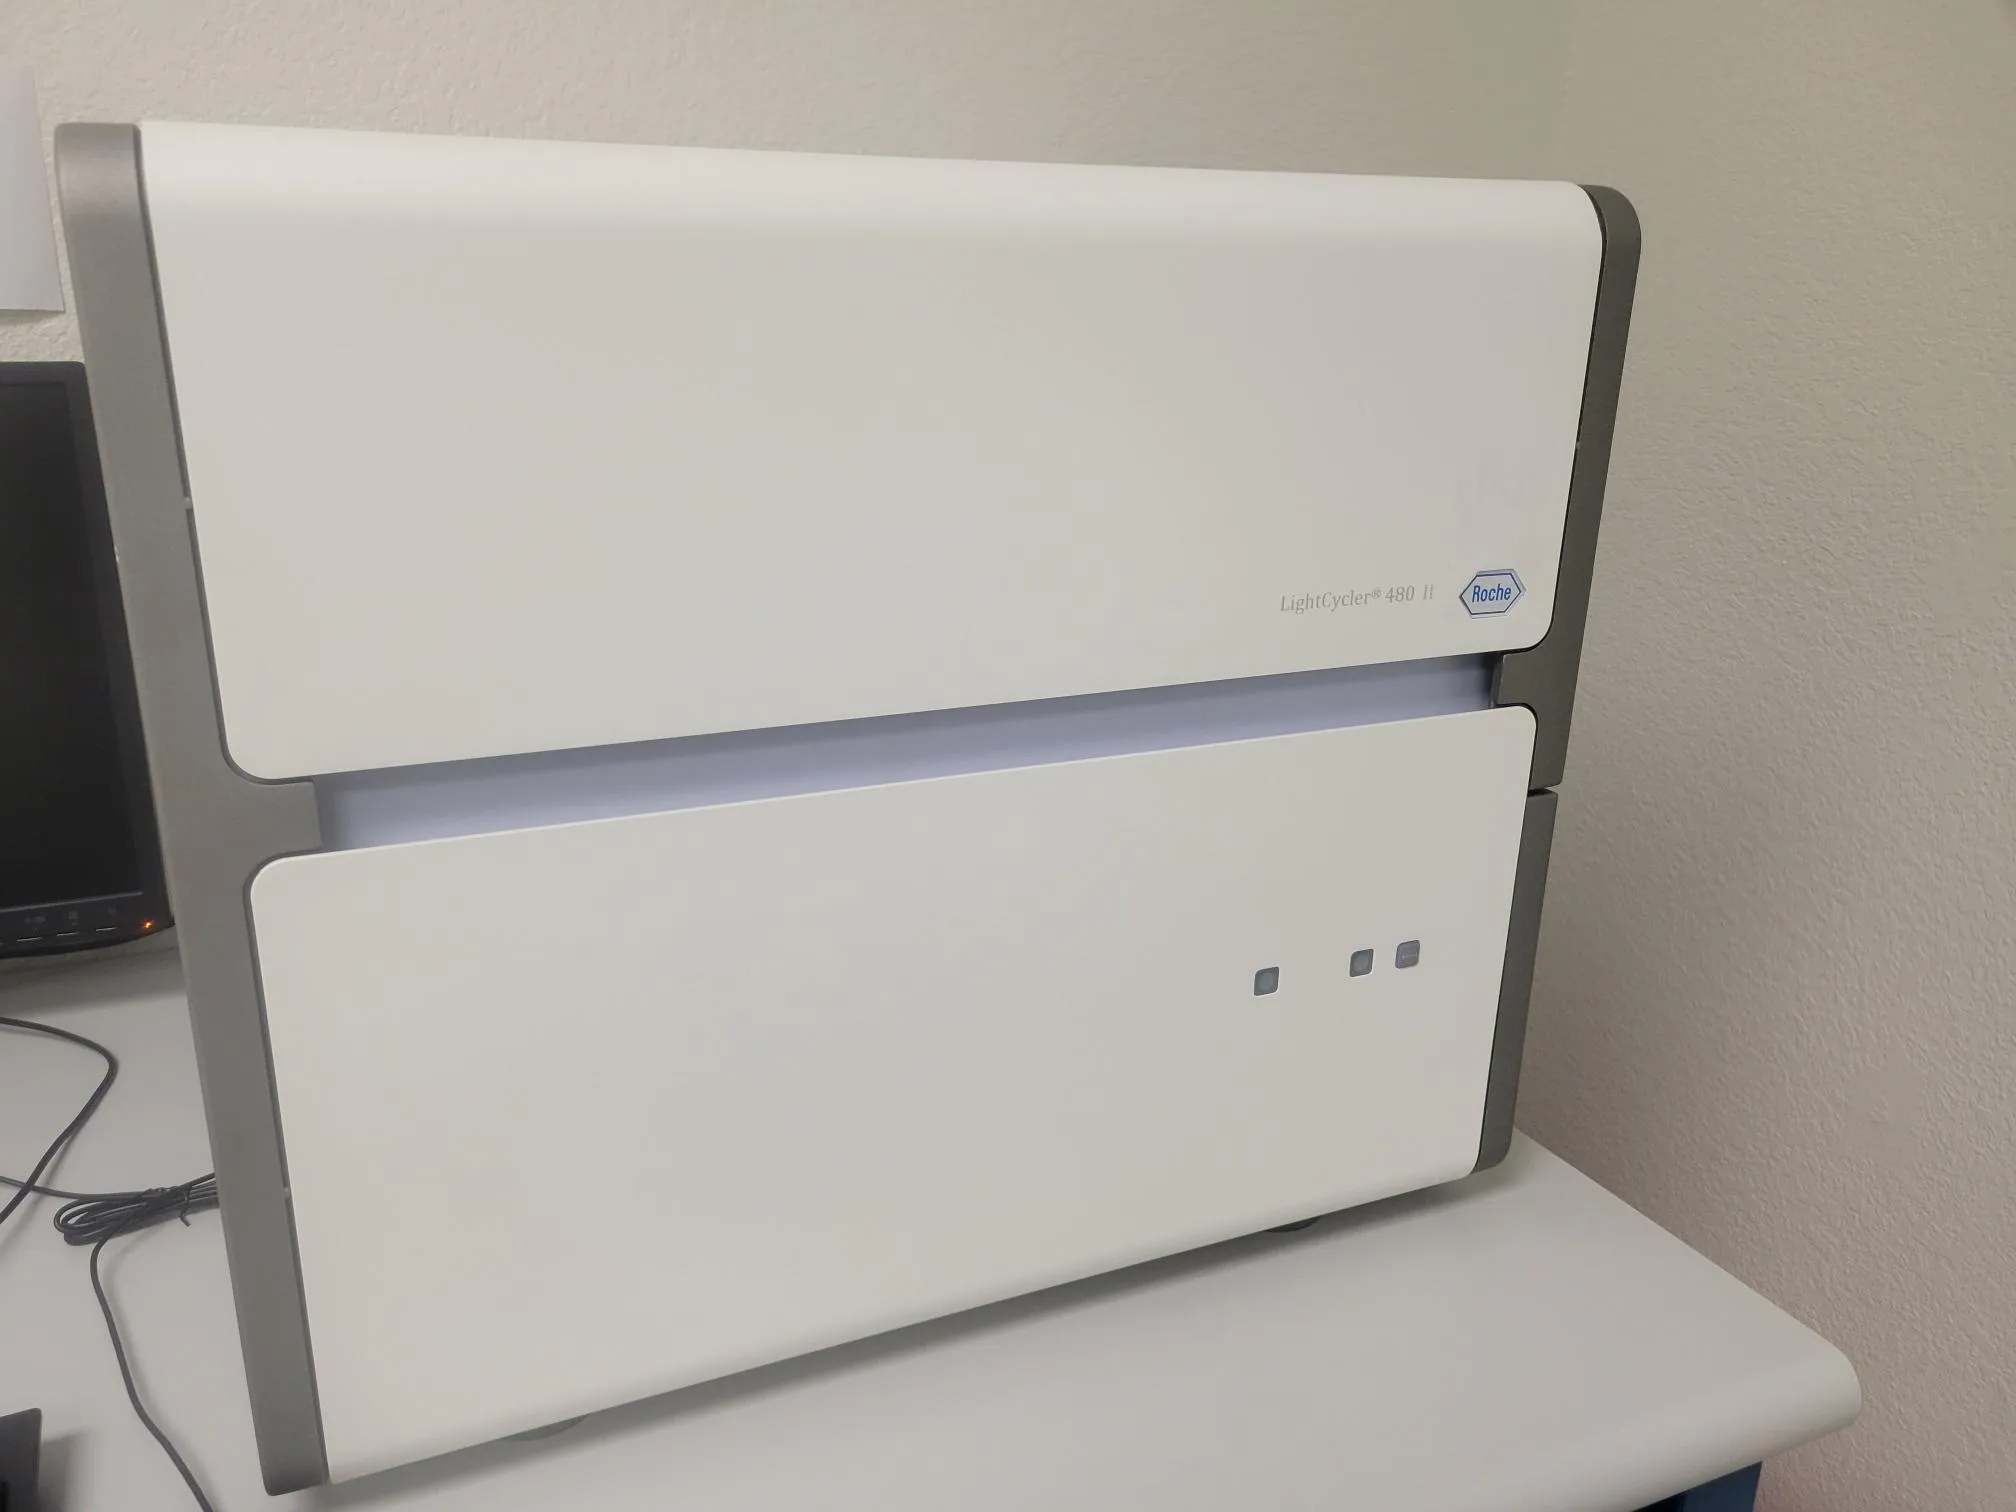 Roche LightCycler 480 II RT-PCR: used; well-maintained by manufacturer; very good condition